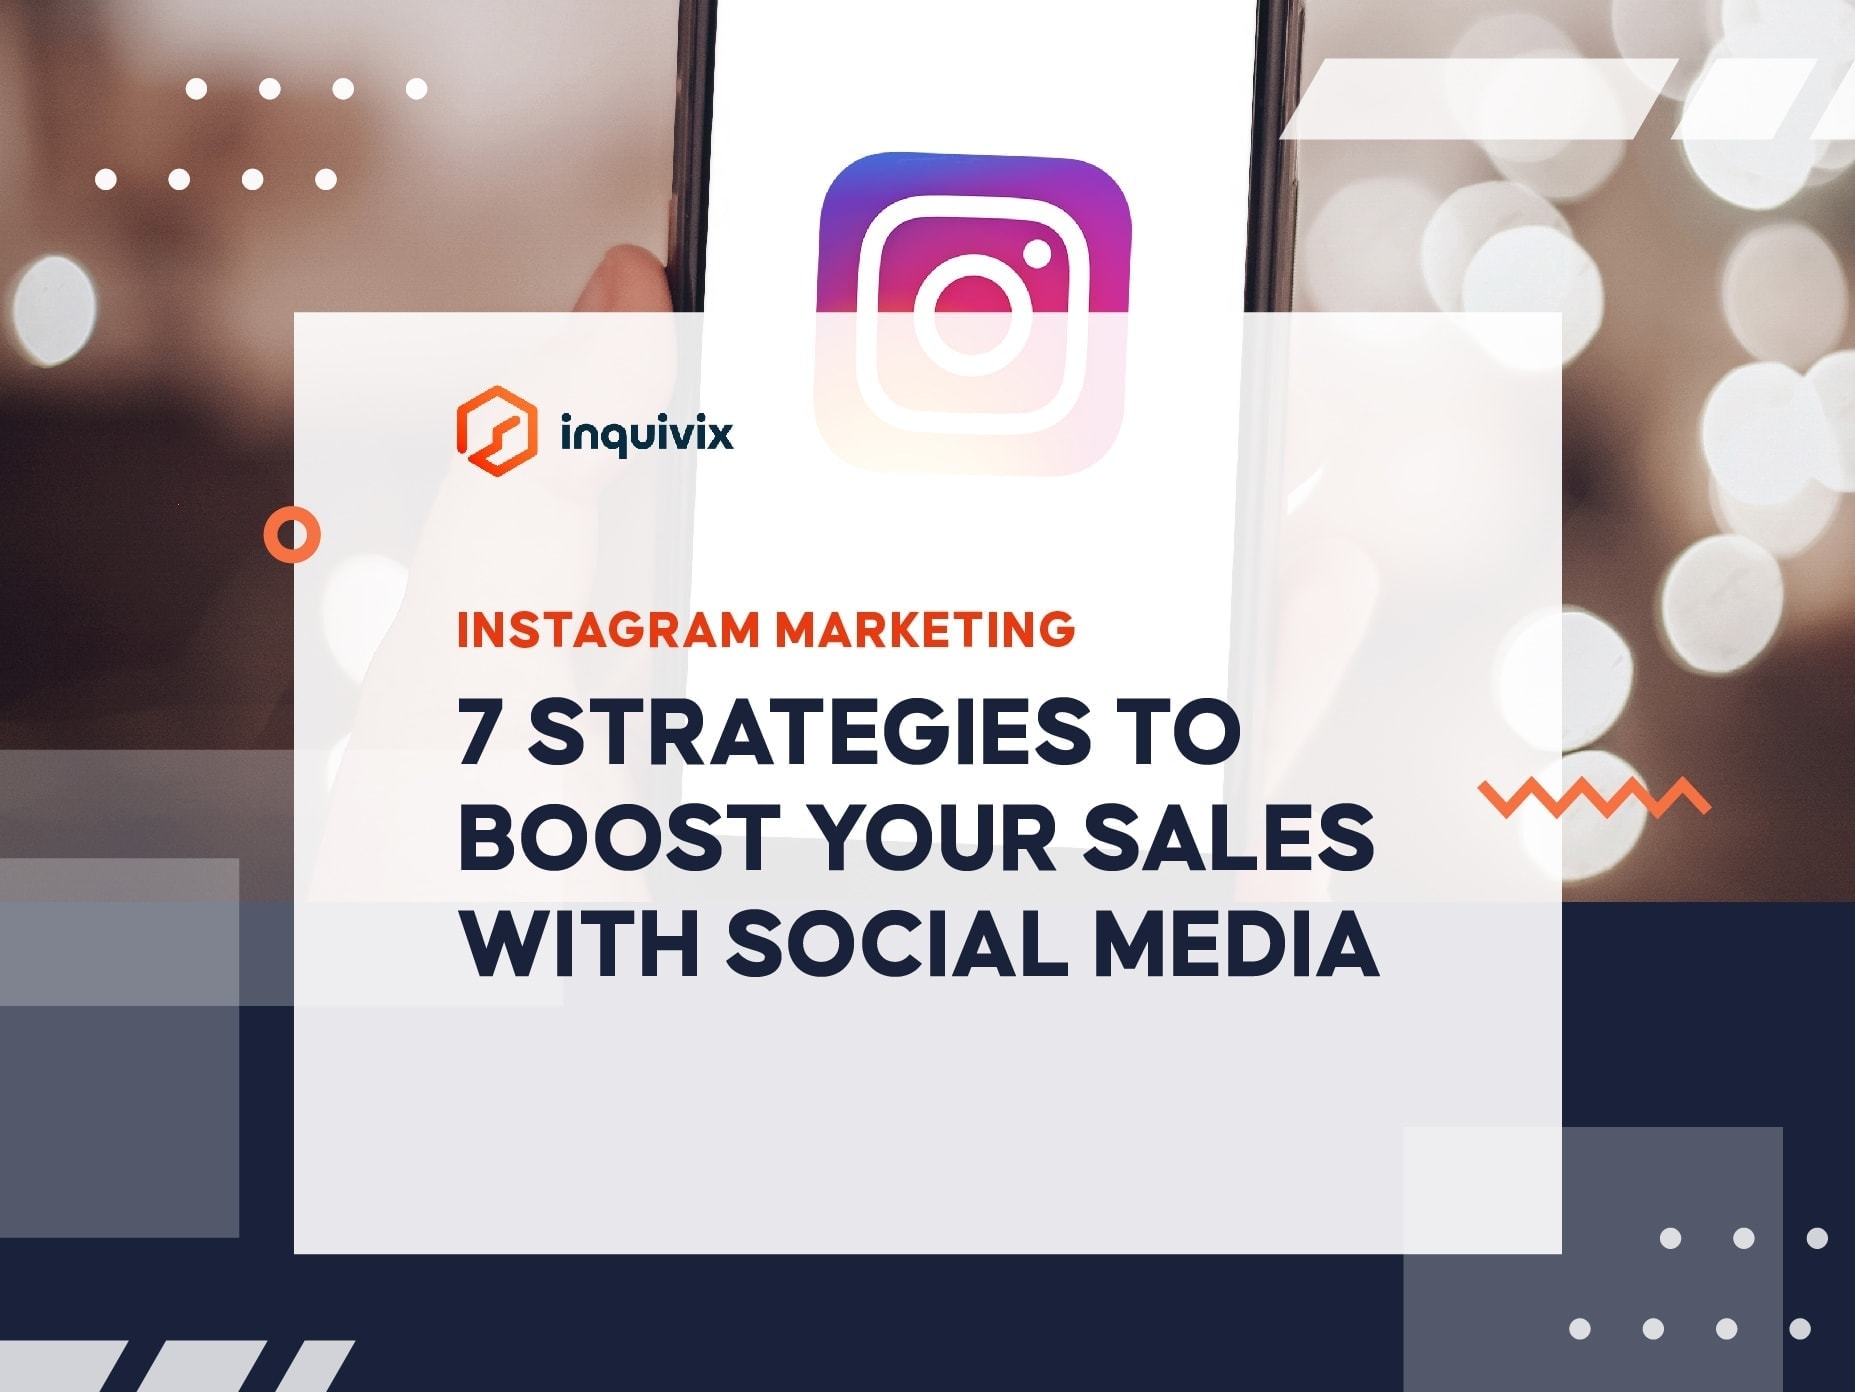 7 STRATEGIES TO BOOST YOUR SALES WITH SOCIAL MEDIA